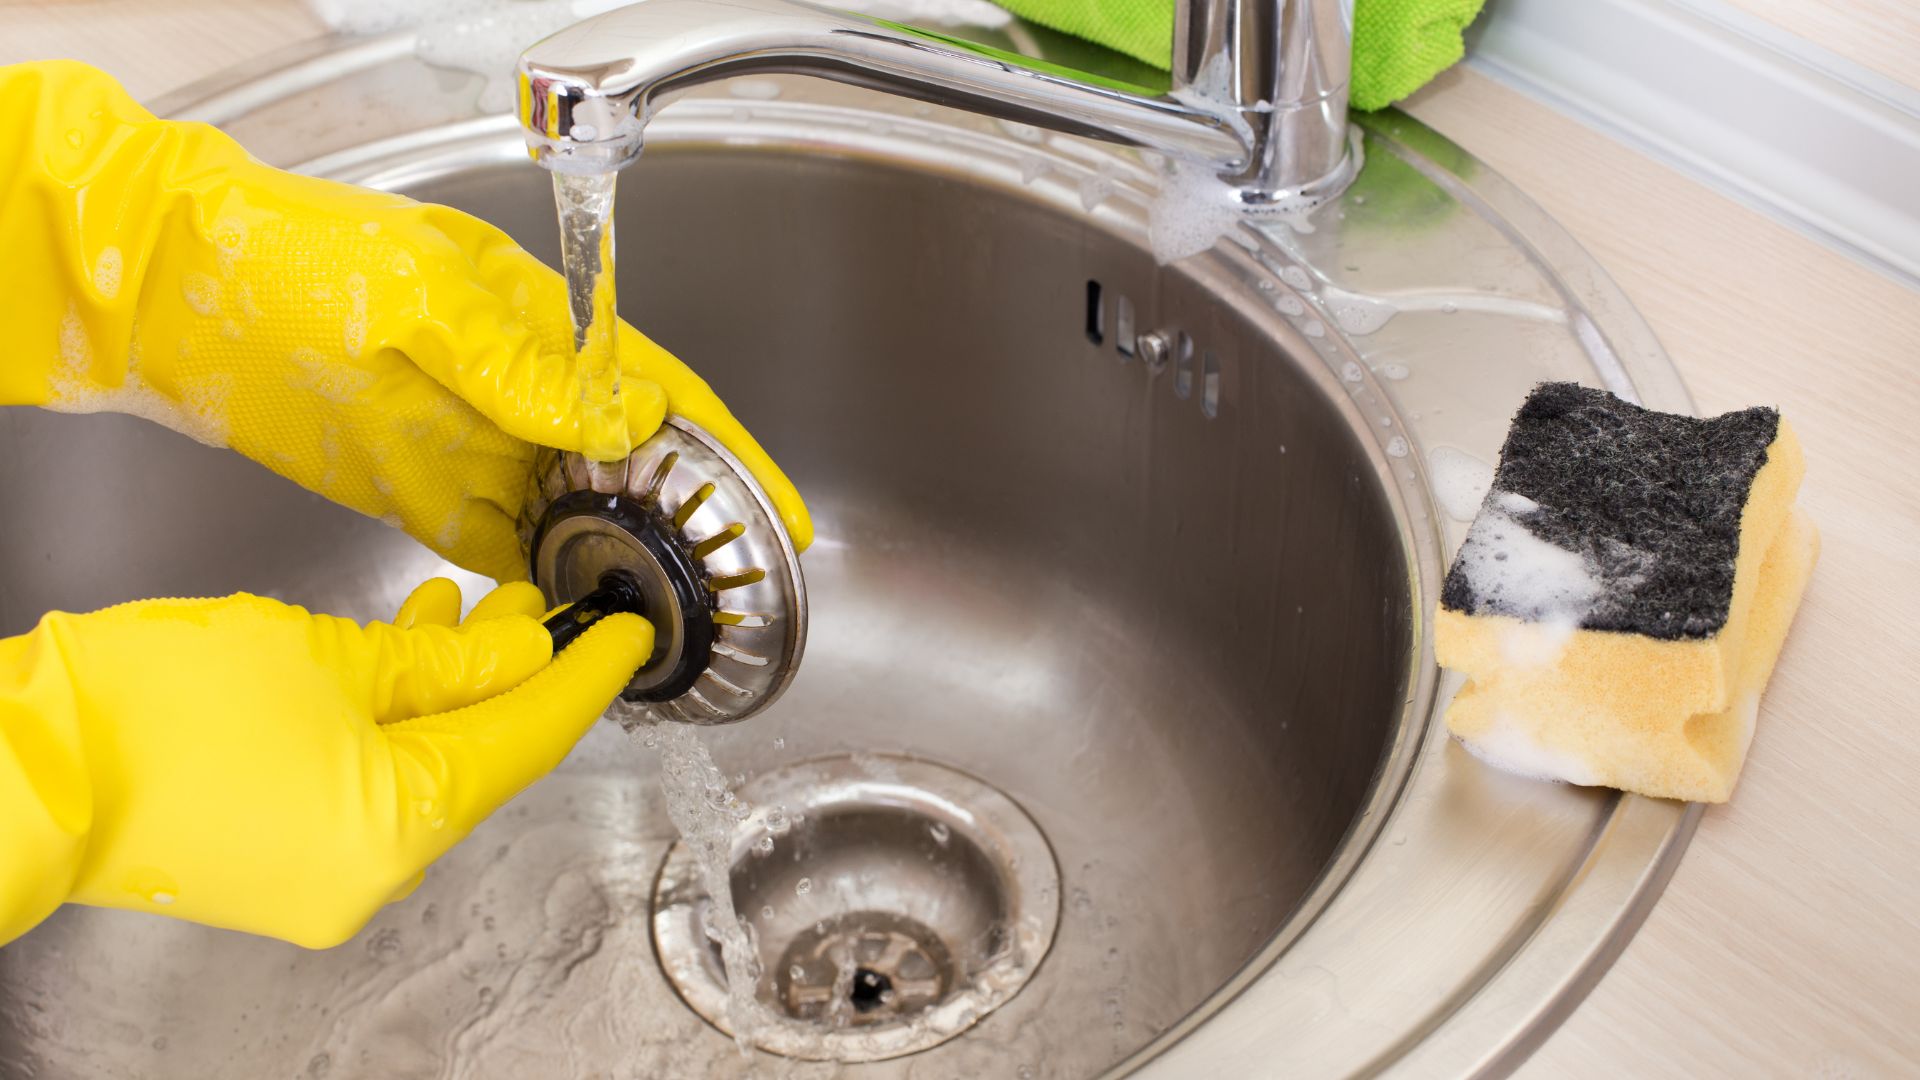 Reach out to CAN Plumbing and Drainage for All Your Clogged Drain Needs, Perfect for Plumbers